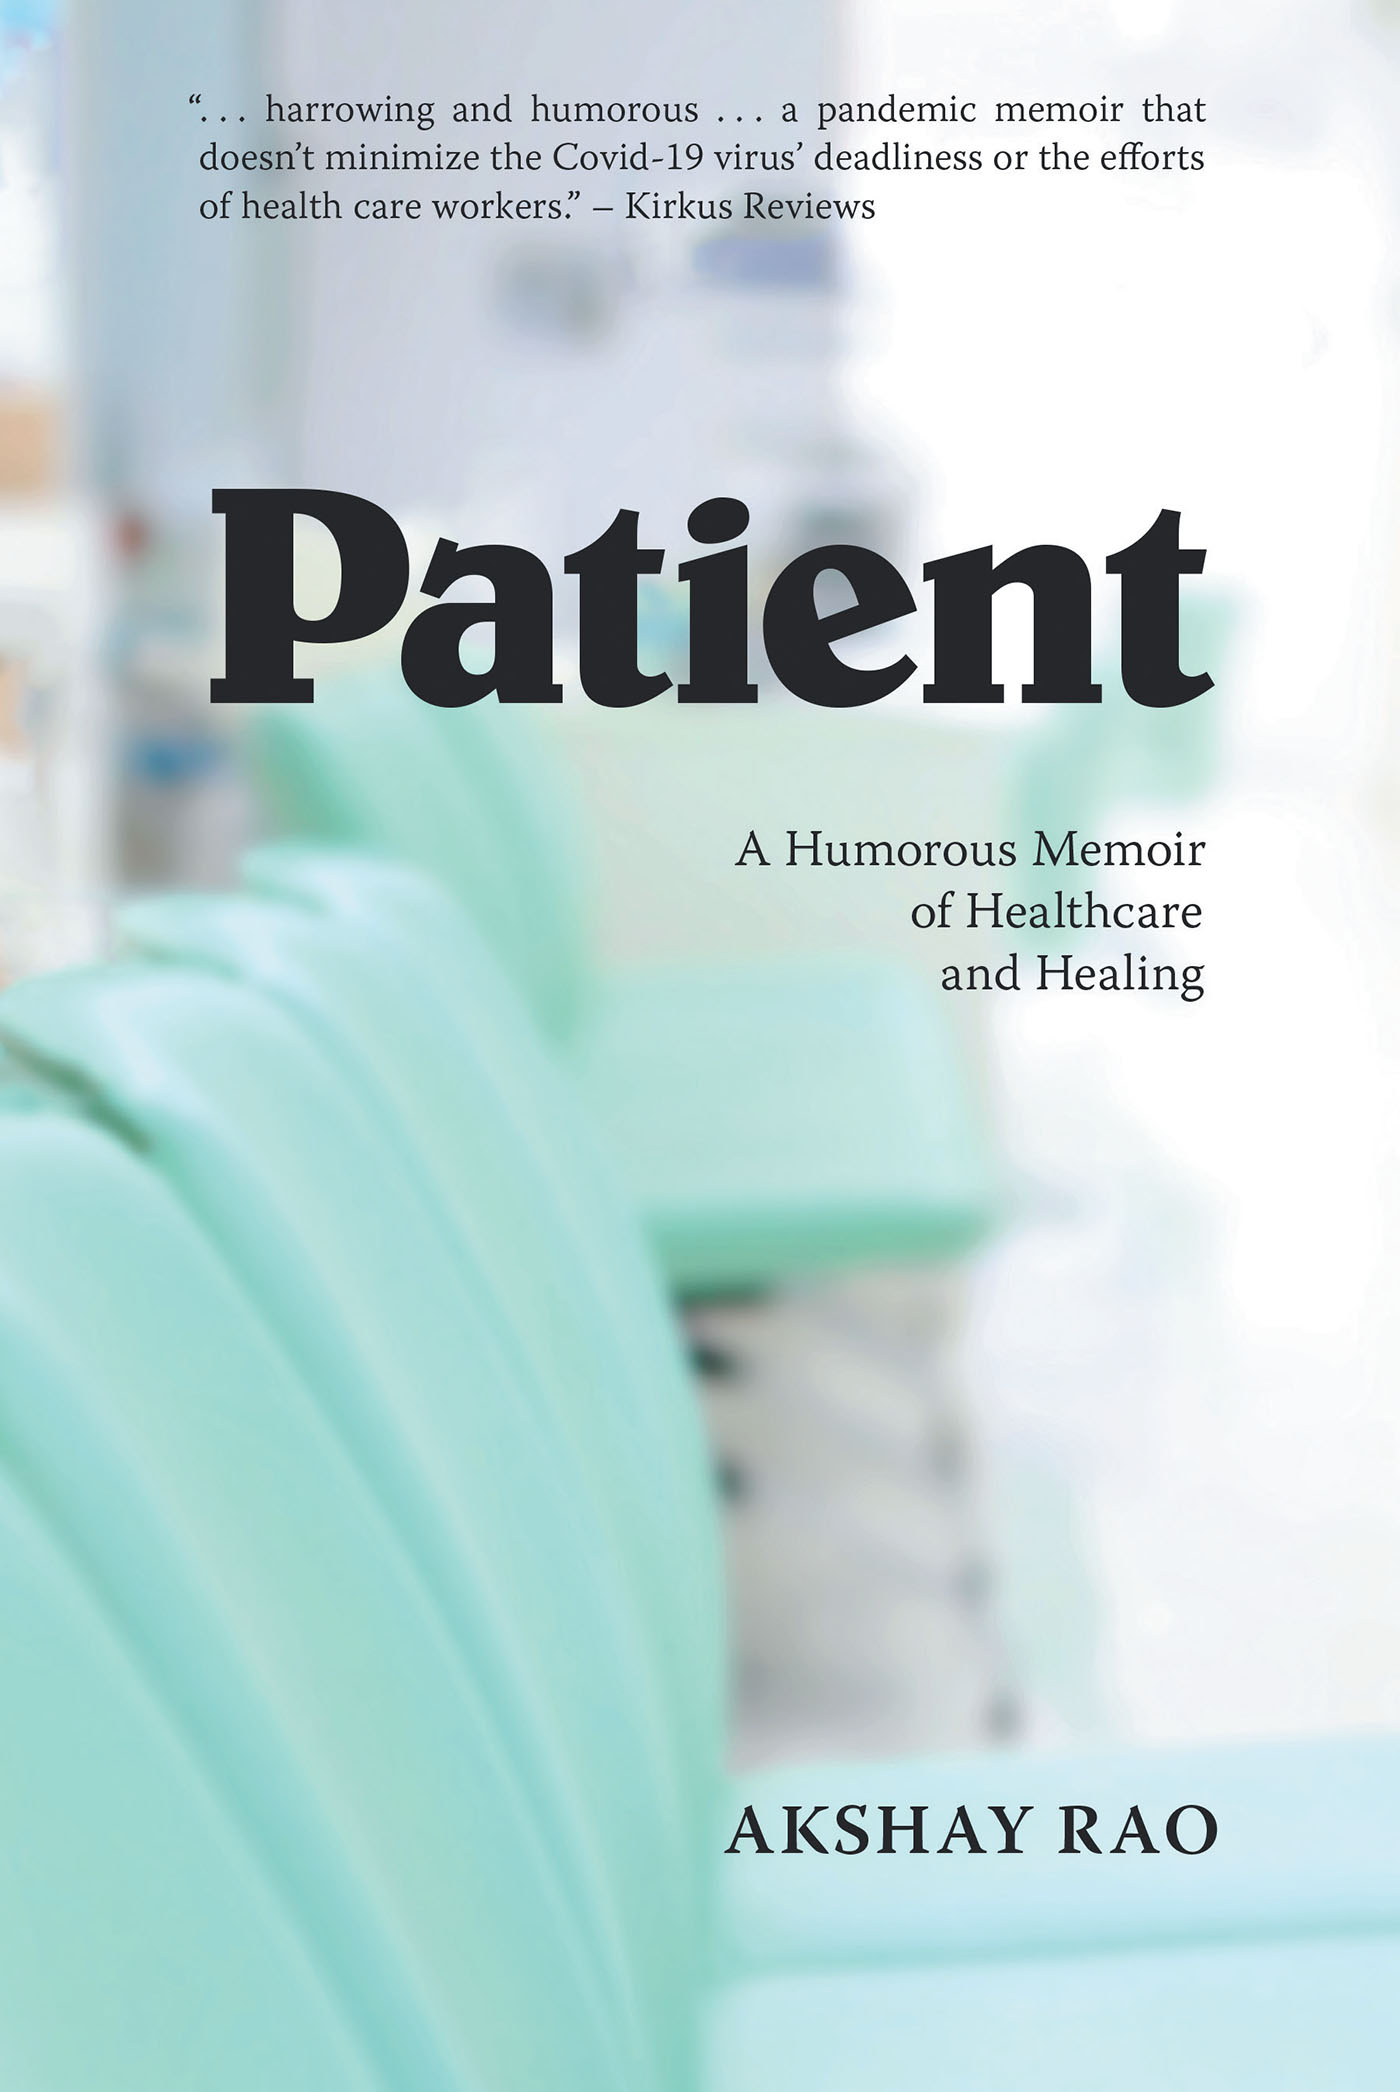 Author Akshay Rao’s New Book, “Patient: A Humorous Memoir of Healthcare and Healing,” is a Delightful, Charming, and Engaging Piece of Prose About Healthcare in America